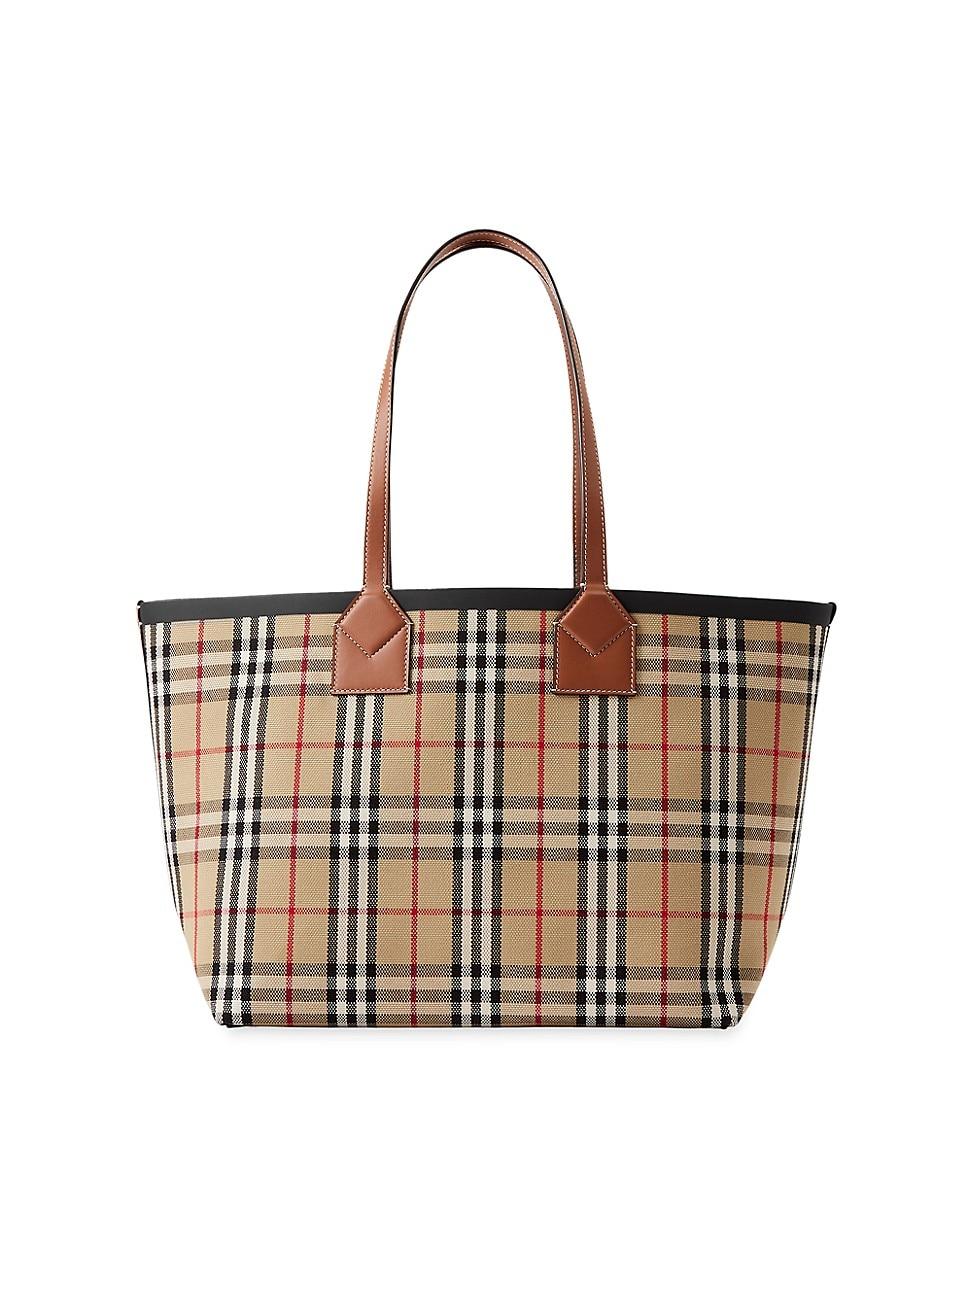 Burberry Medium London Check Tote Bag in White | Lyst